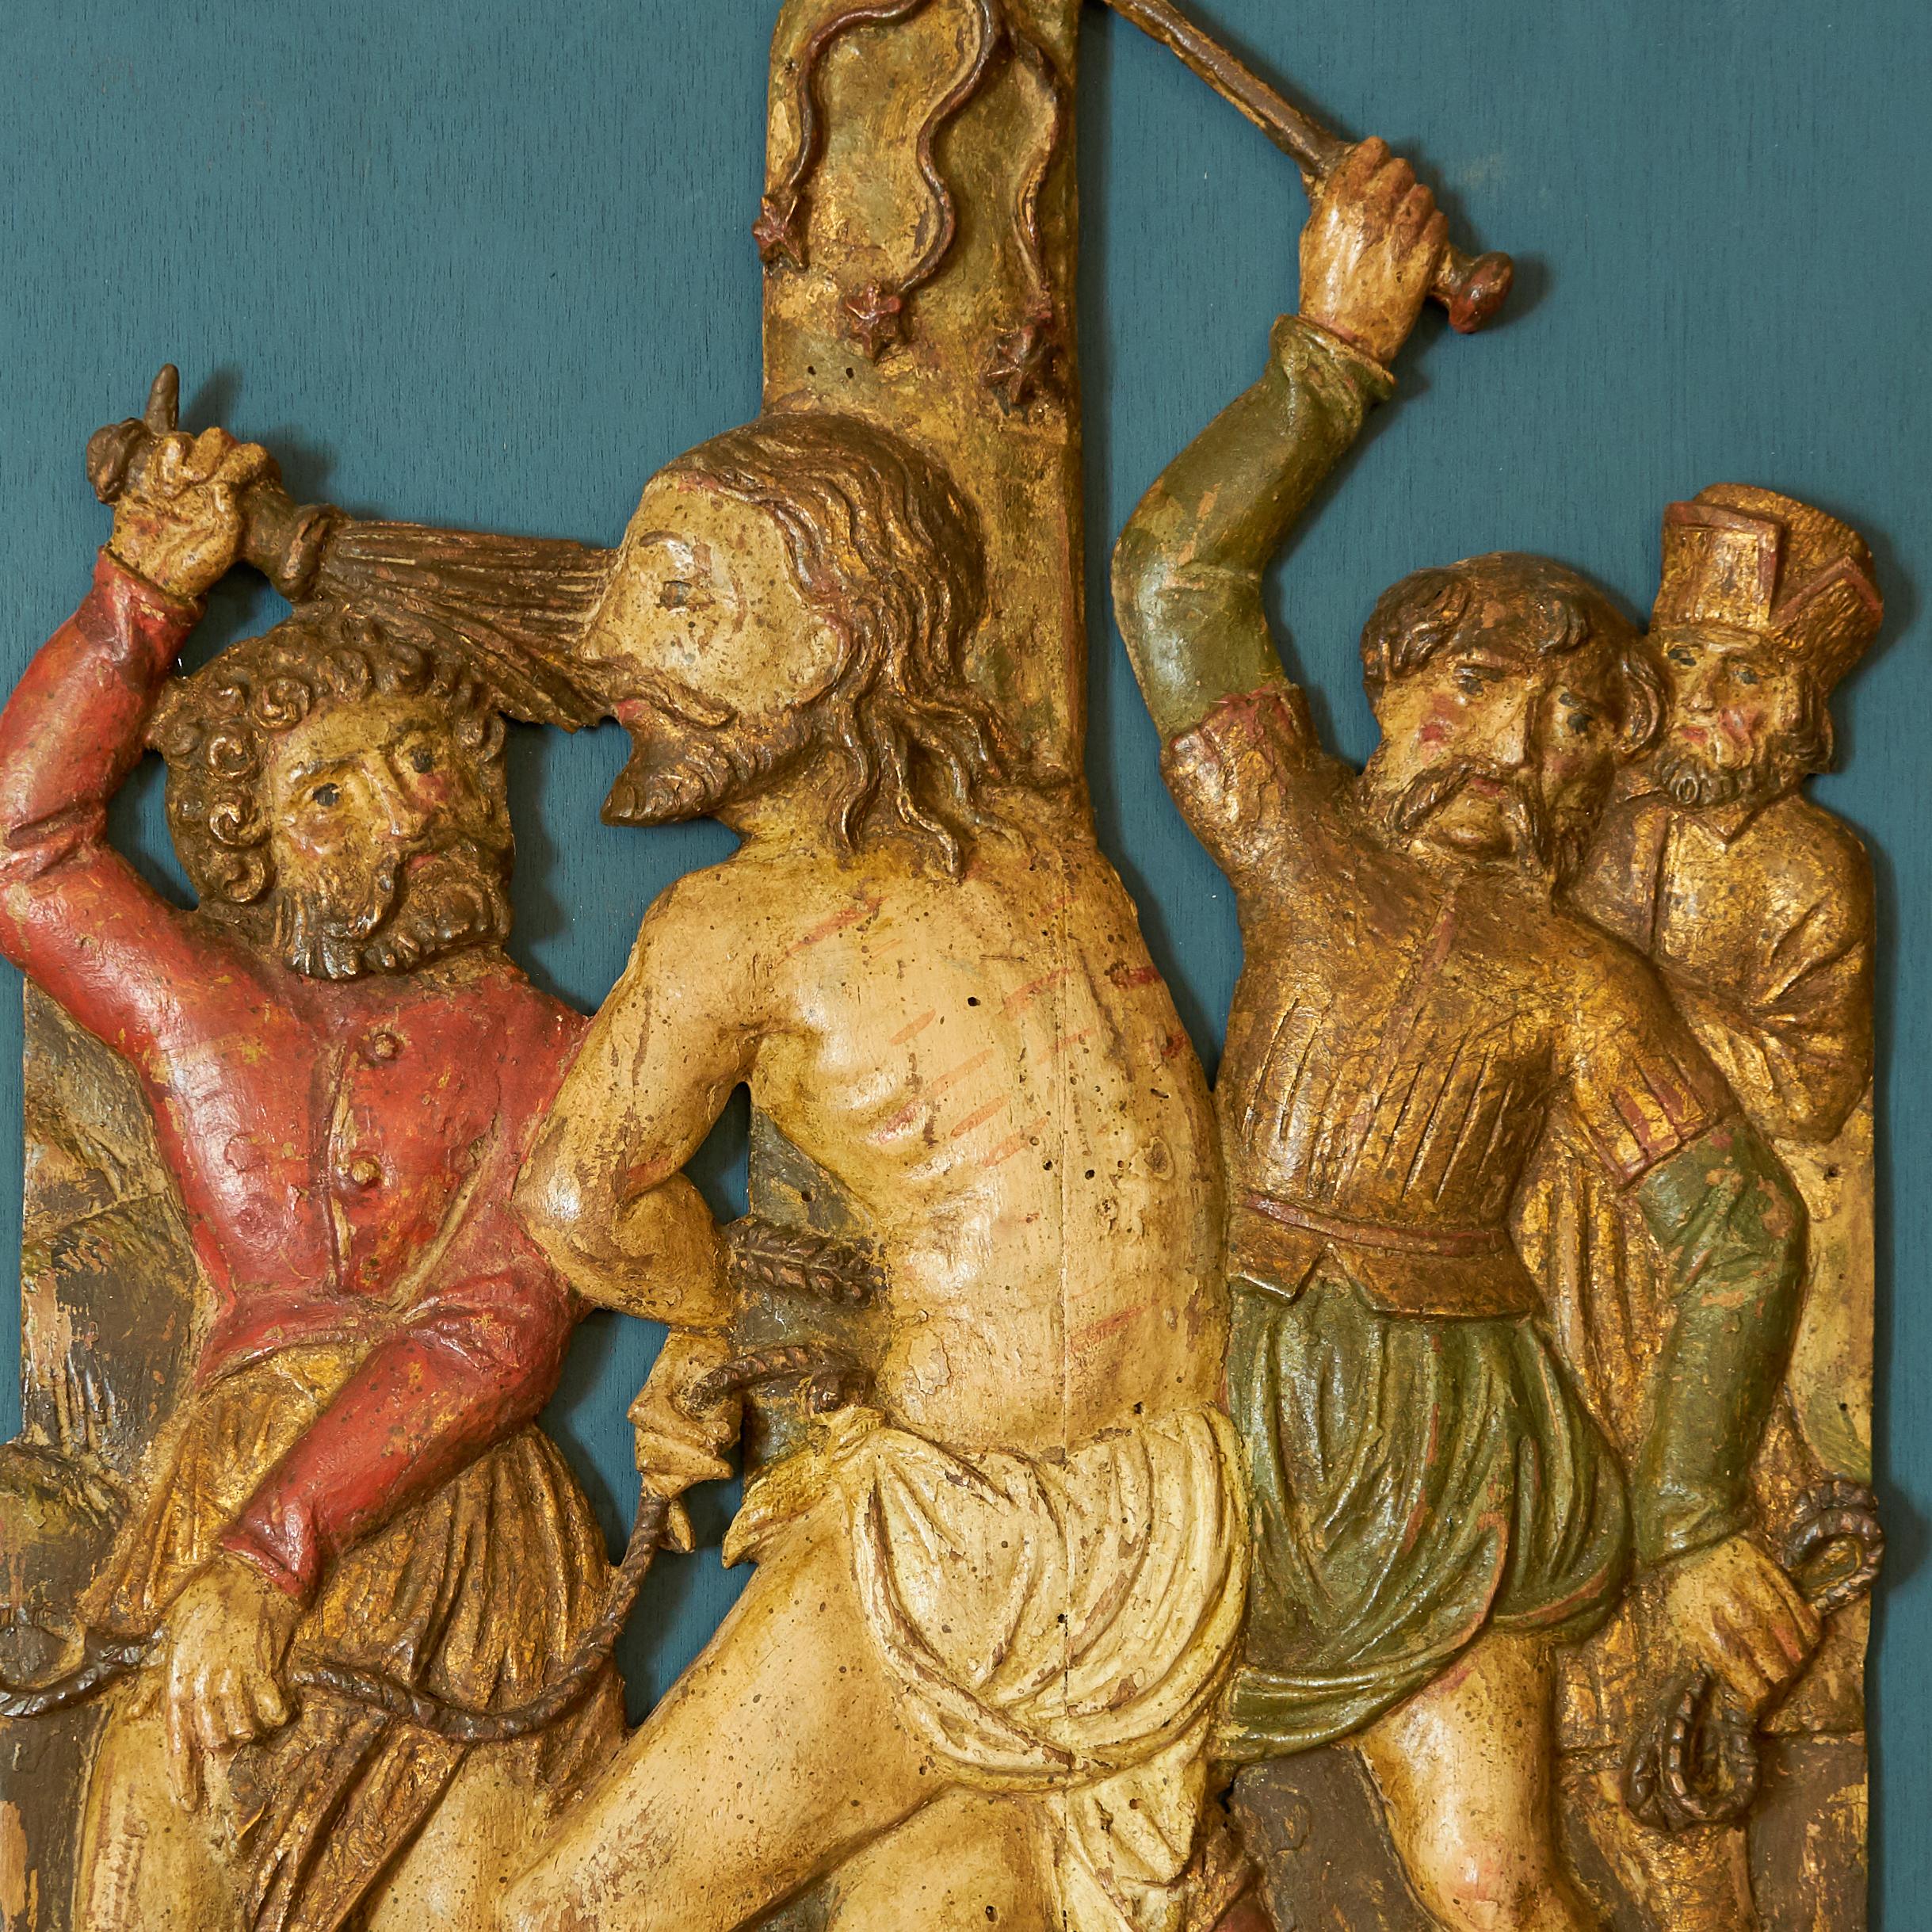 Pilate makes Jesus torture after the sentence. In the Bible the flogging is described only
briefly, but in the visual arts it has a rich tradition. Impressive in this framed altarpiece is the
contrast between Jesus' subdued attitude and the